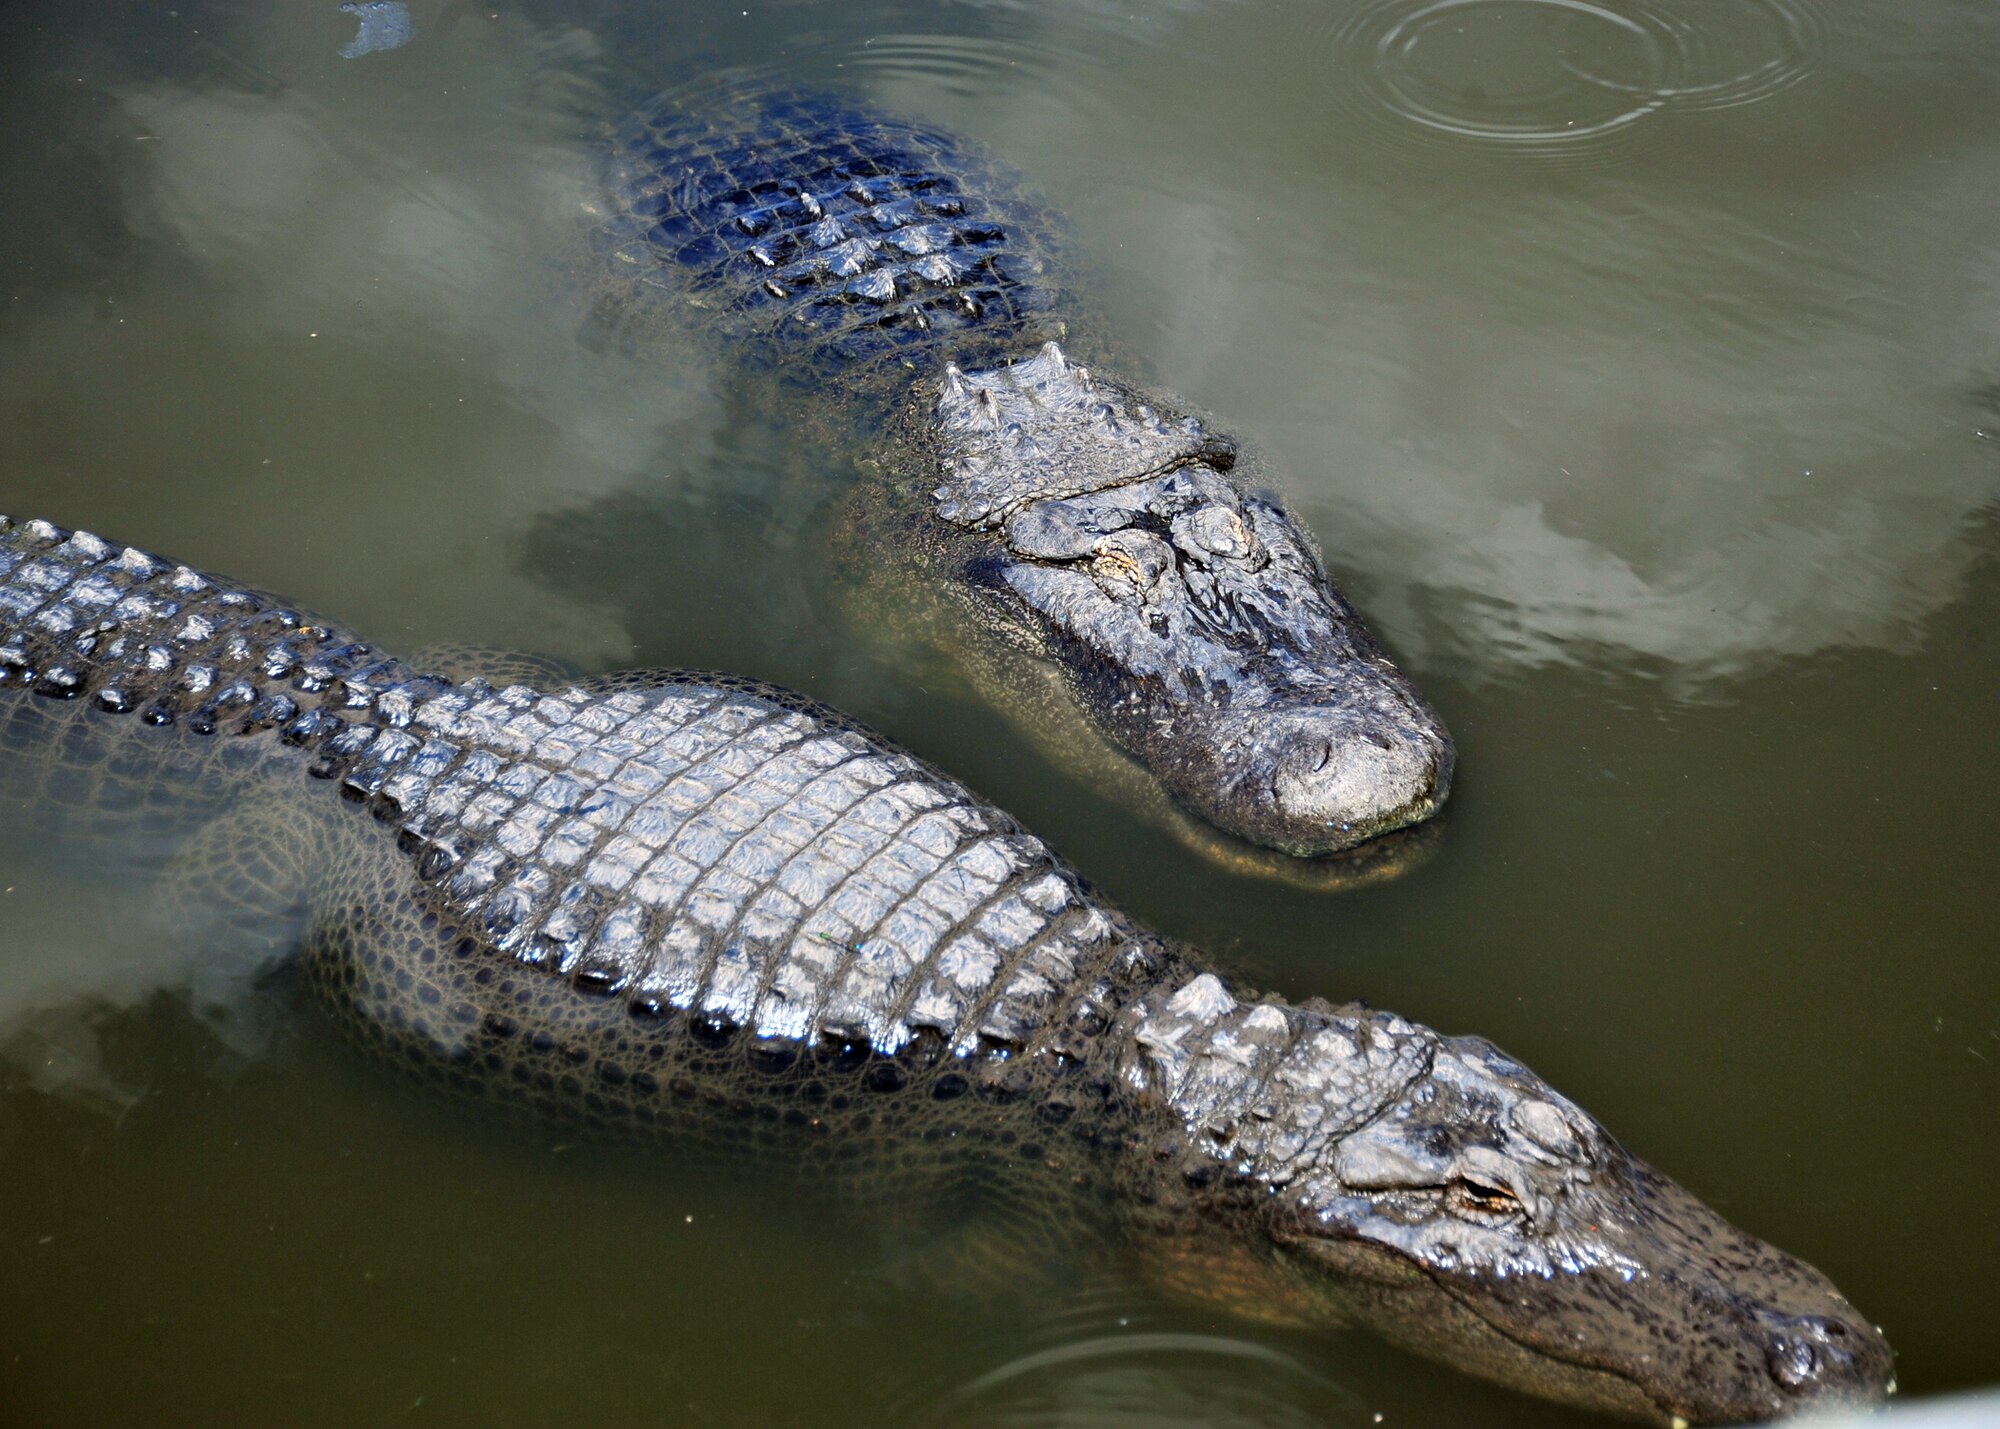 Two adult alligators swim in a swamp April 5 at Gatorland in Orlando, Fla. More than 50 Tyndall Airmen went to Orlando to work on their spiritual fitness. (U.S. Air Force photo by Airman Sergio A. Gamboa)